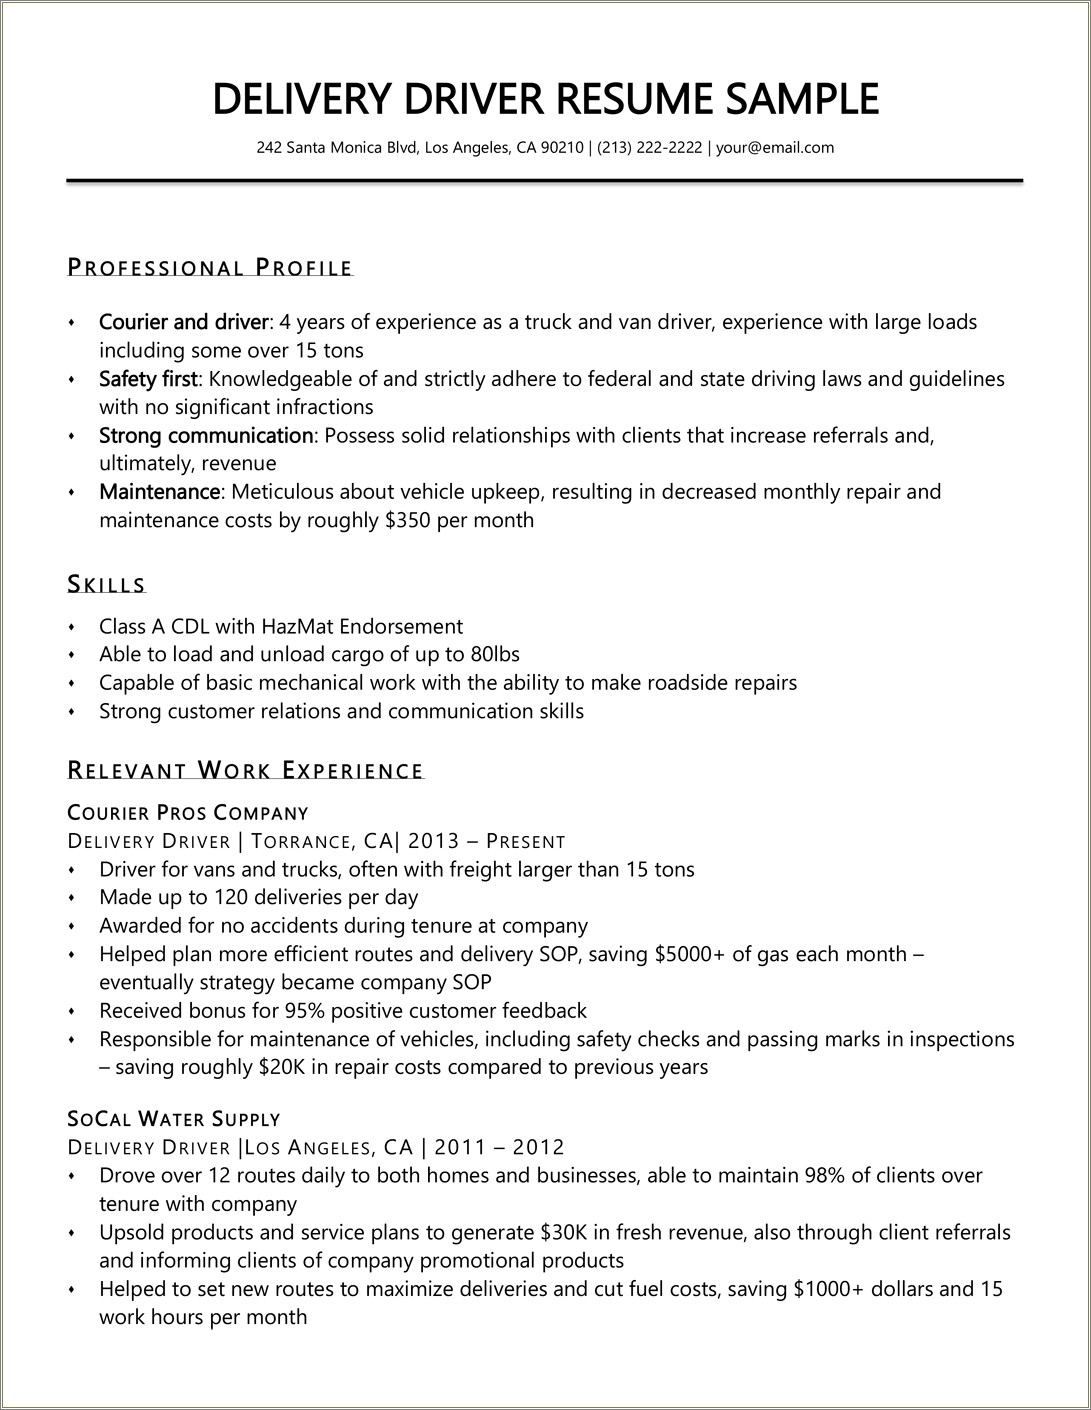 Sample Resume For Parts Delivery Driver